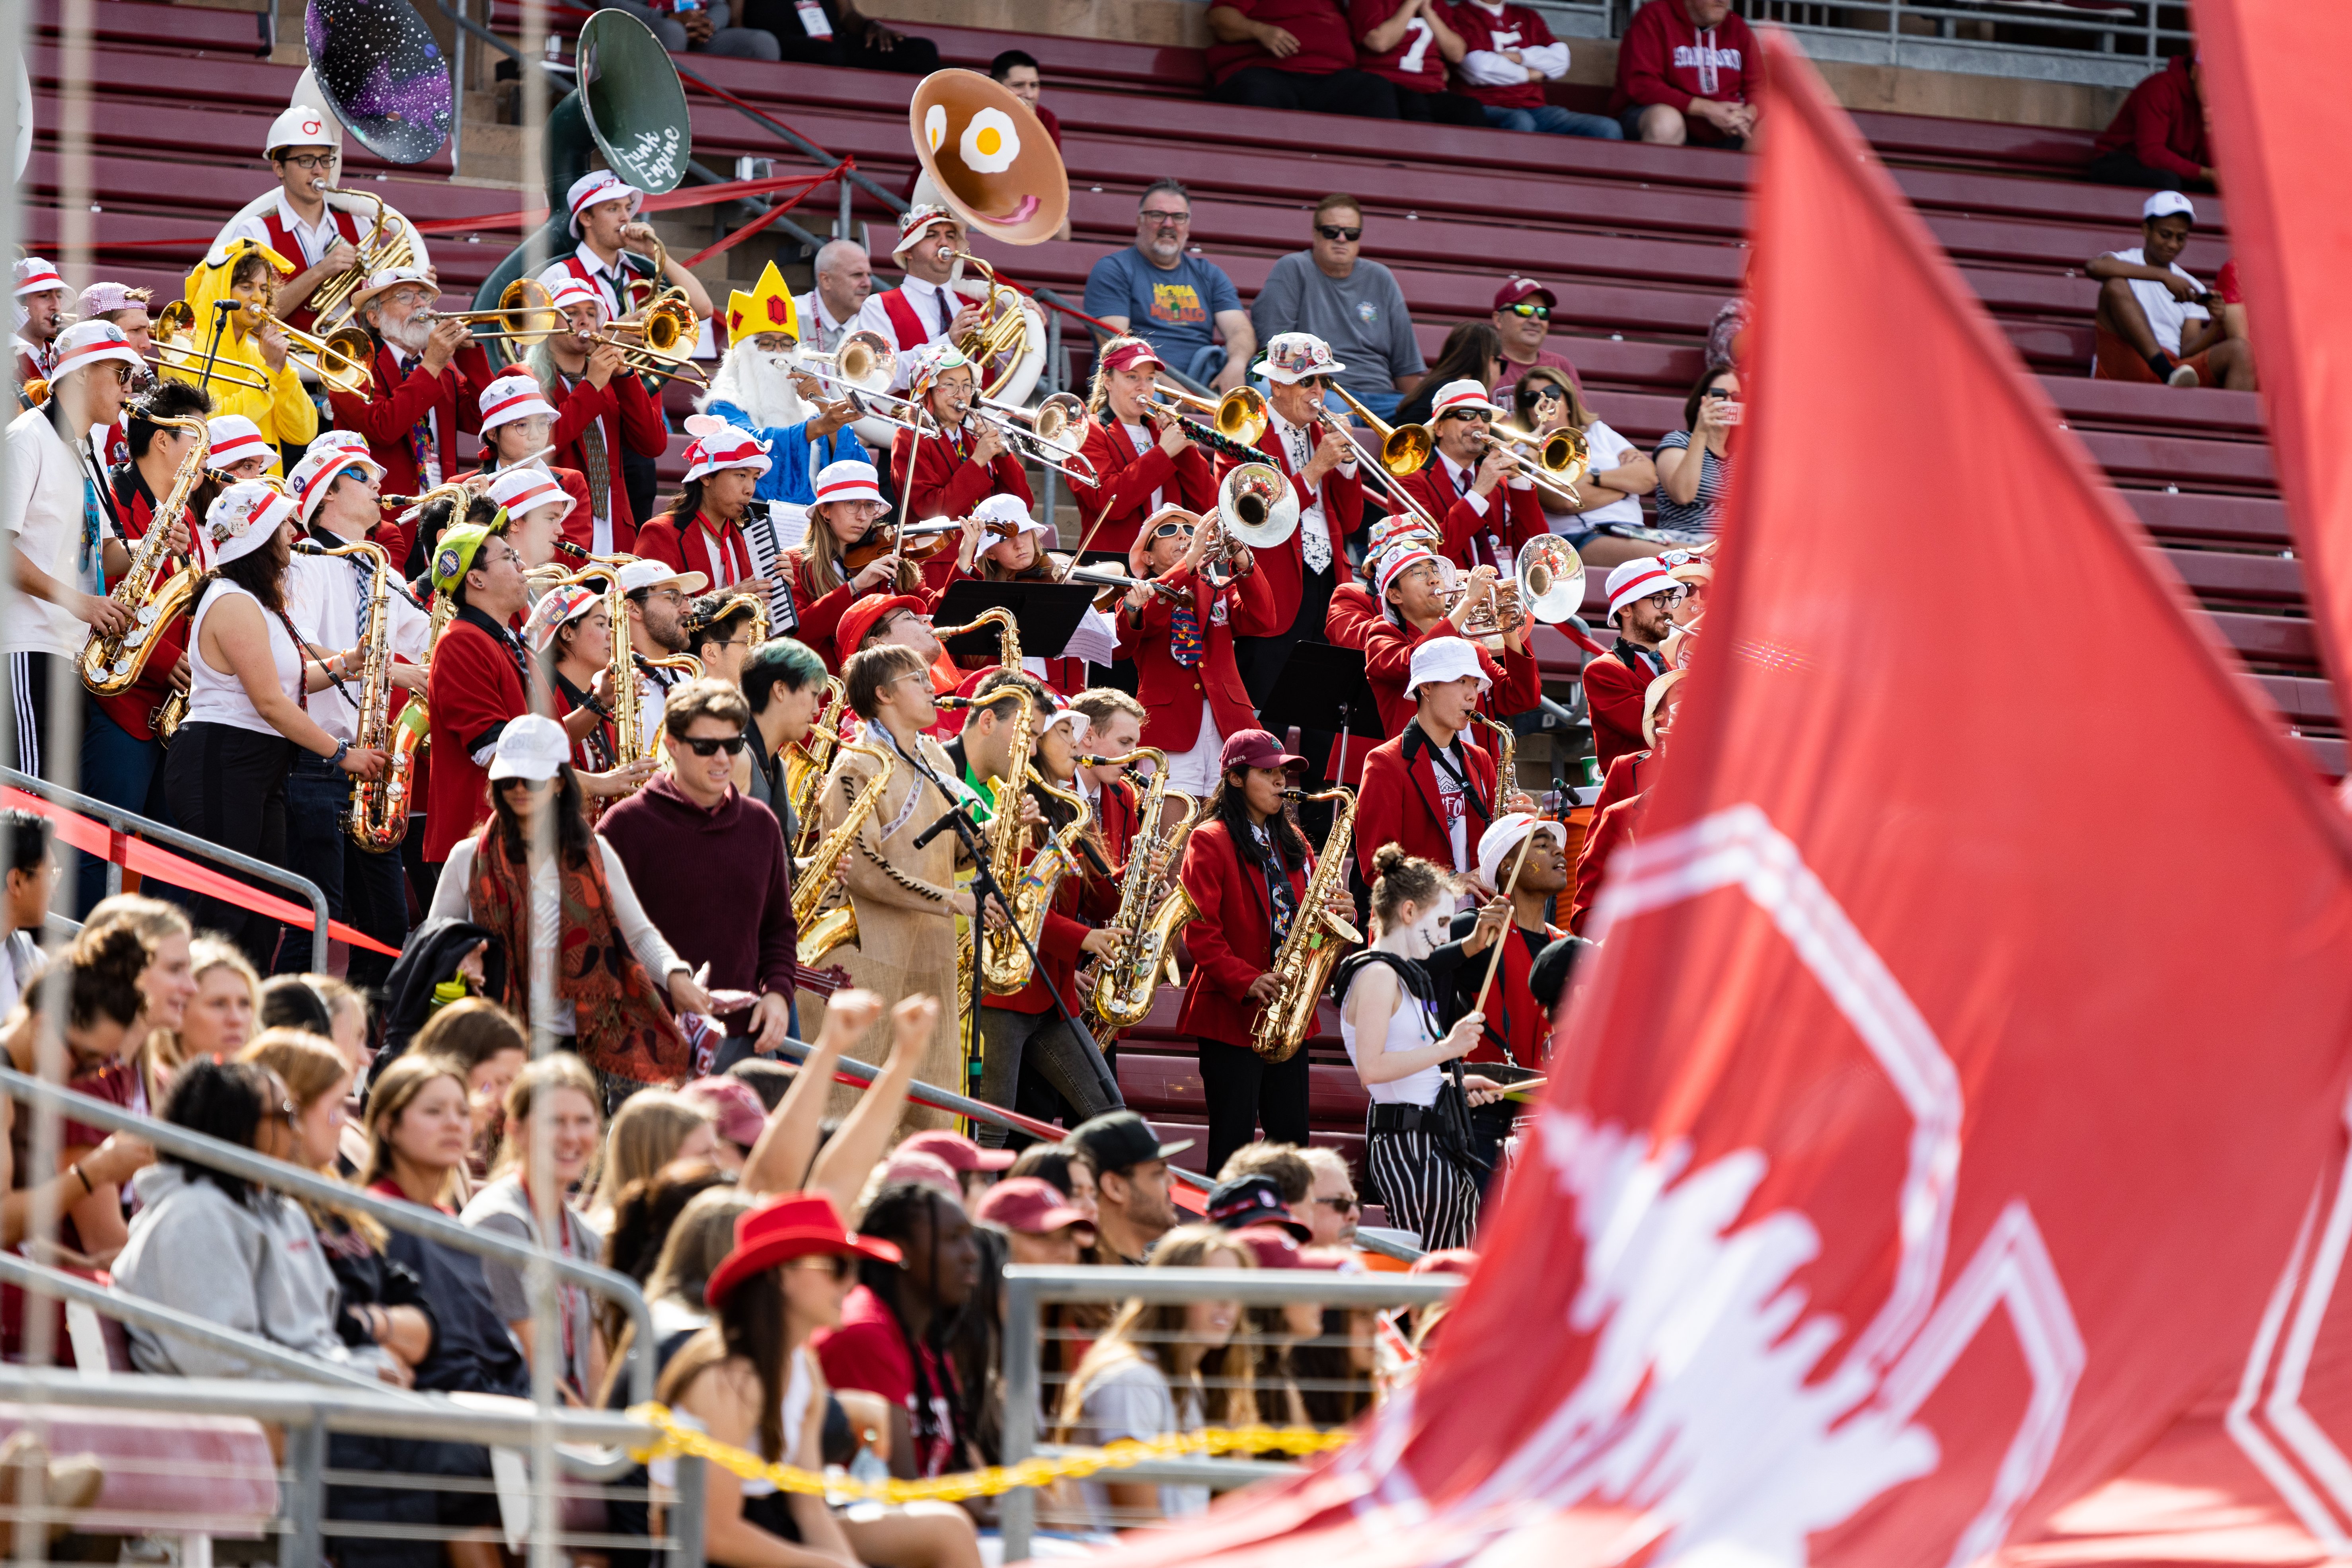 A Stanford student's guide to the 125th Big Game